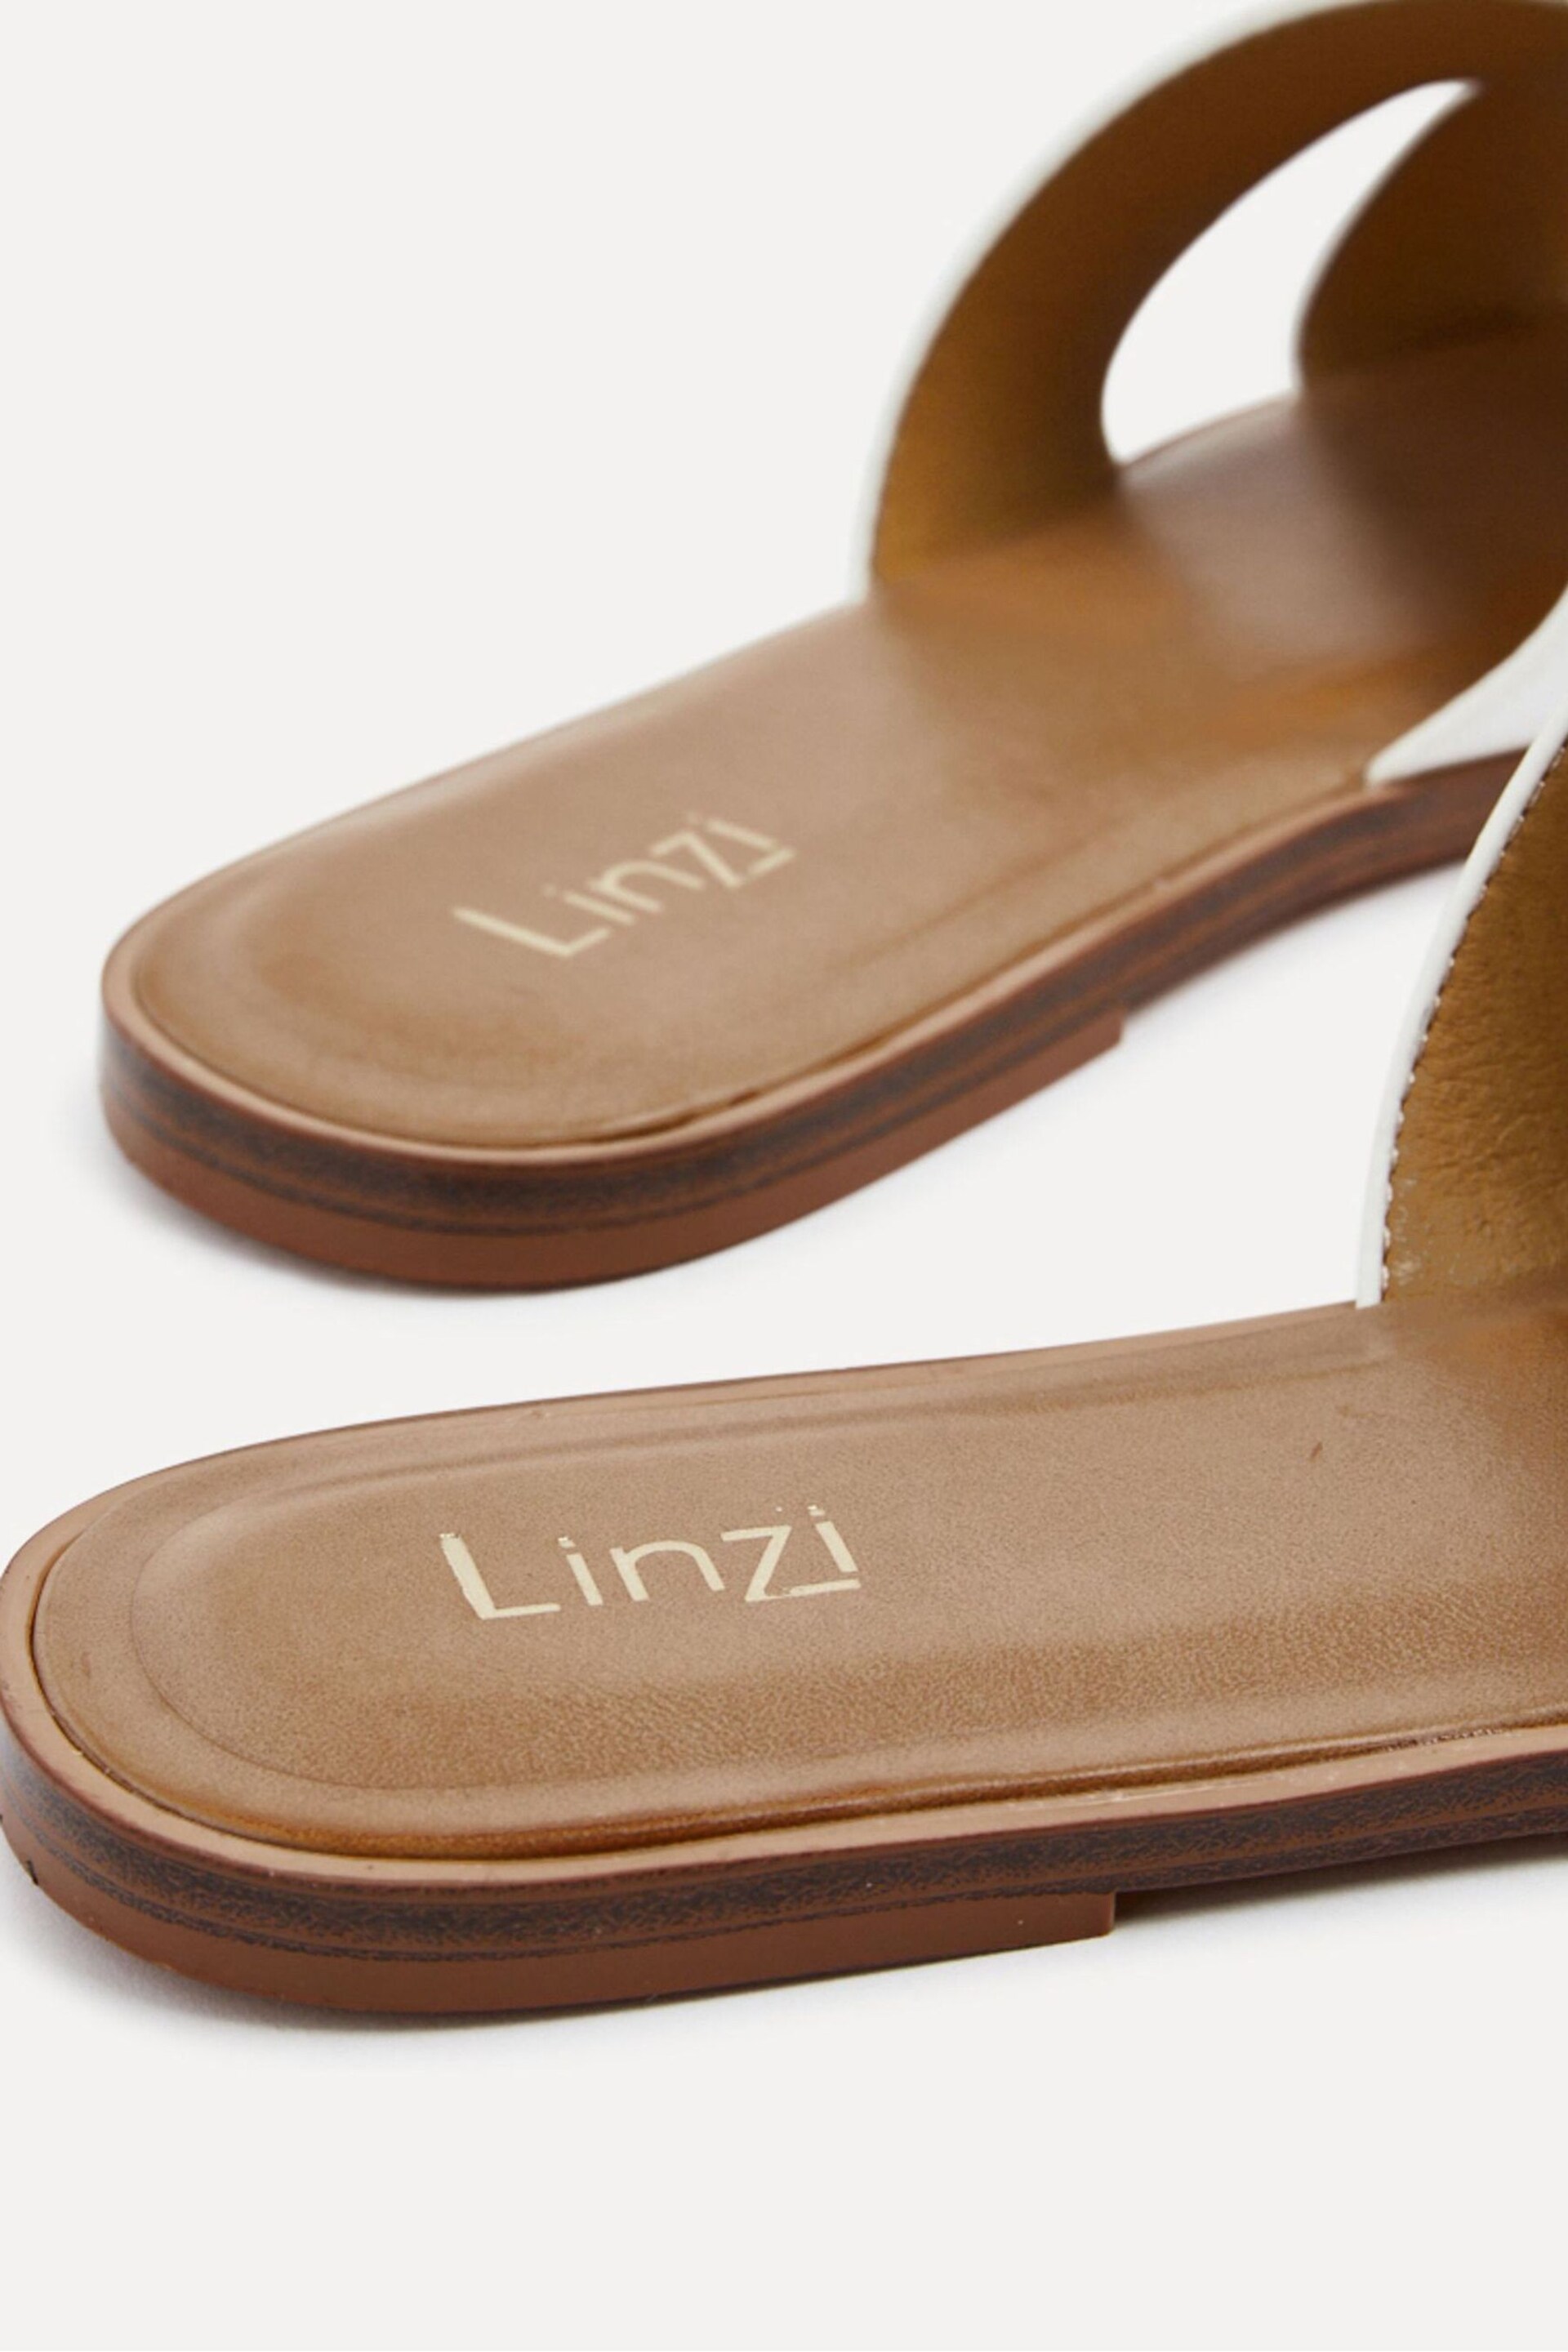 Linzi White Petra Flat Sliders With Open Loop Detailing - Image 4 of 5